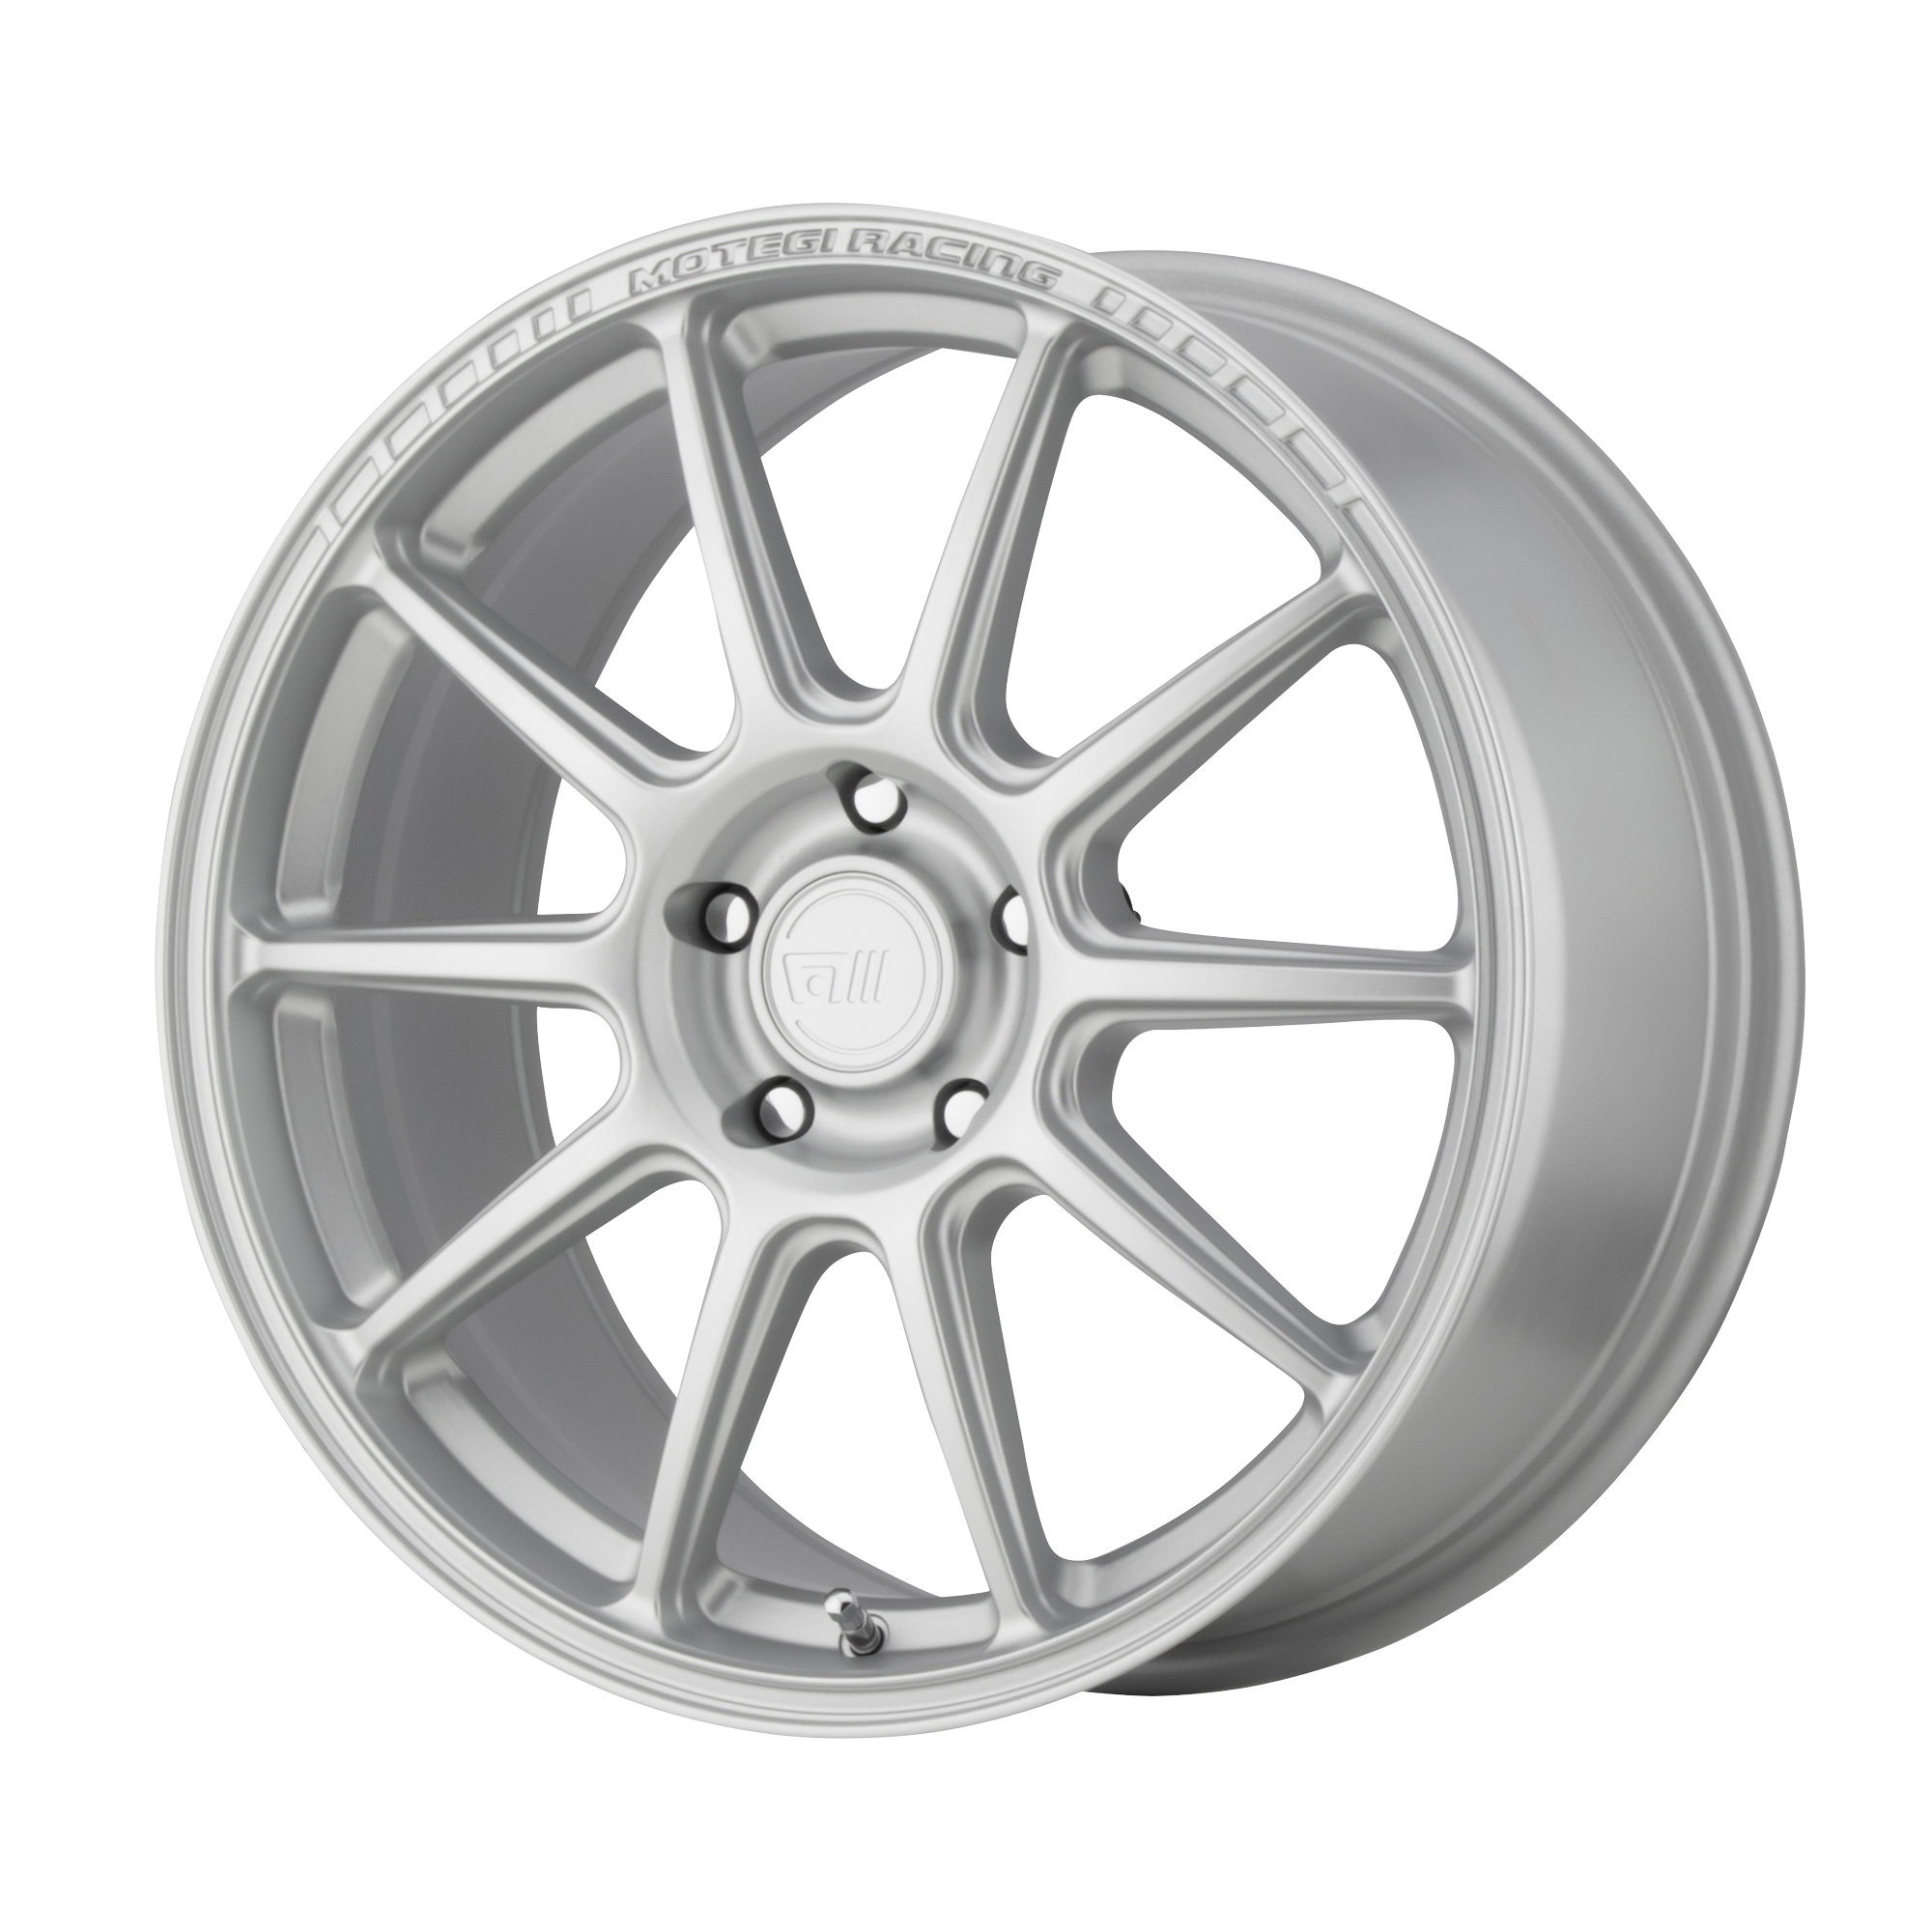 MR140 18x8.5 5x112.00 HYPER SILVER (45 mm) - Tires and Engine Performance